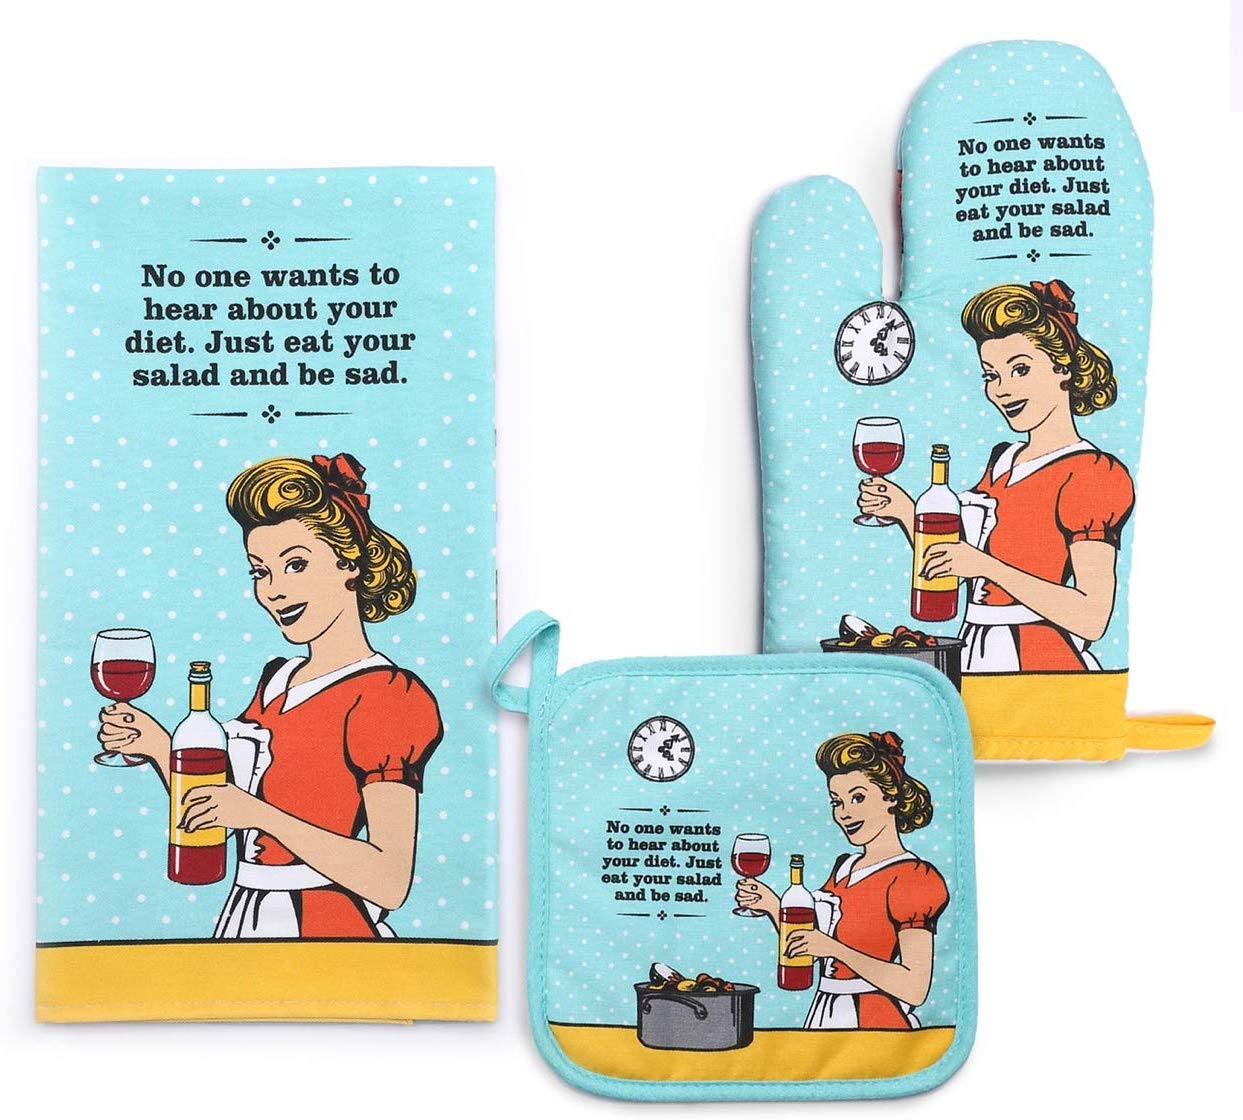 GROBRO7 6Pcs Funny Oven Mitts Pot Holders Set The Kitchen is The Heart of  The Home